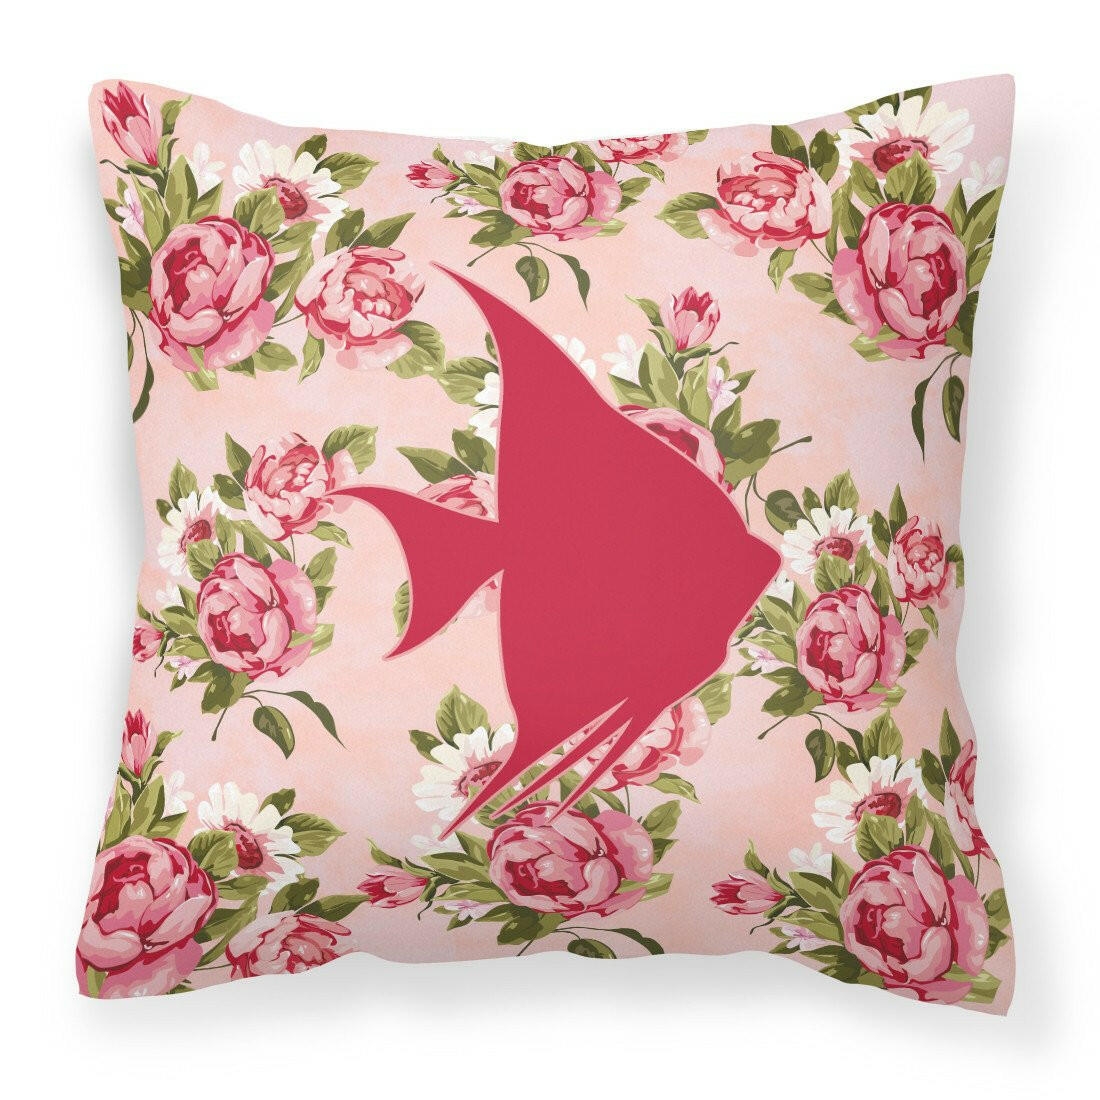 Fish - Angel Fish Shabby Chic Pink Roses  Fabric Decorative Pillow BB1022-RS-PK-PW1414 - the-store.com